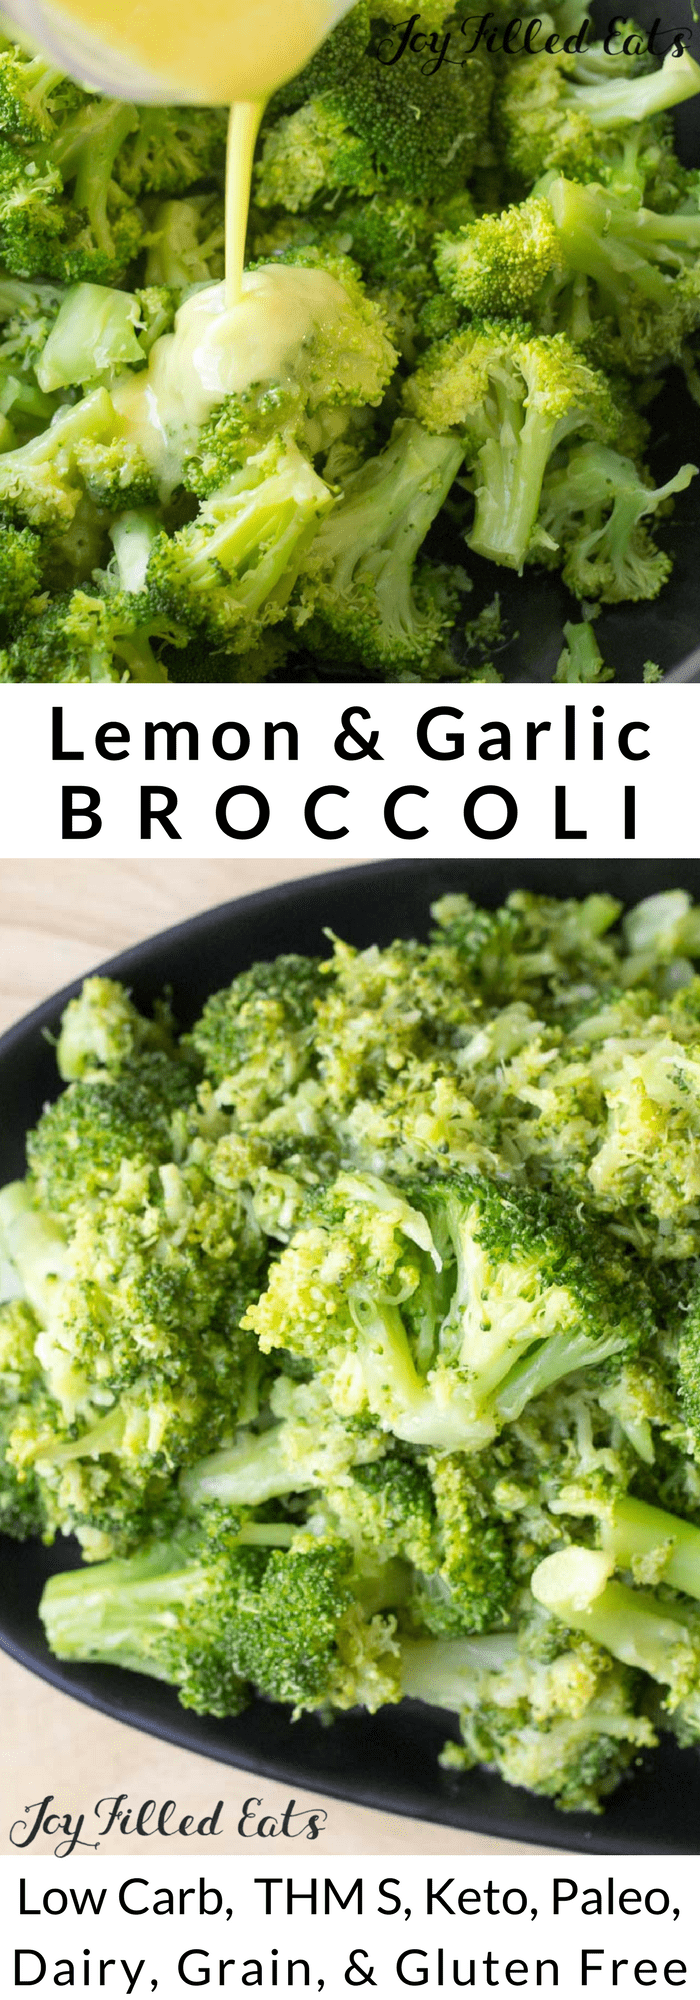 Lemon & Garlic Broccoli - Low Carb Keto Grain-Free Gluten-Free THM S This Garlic Broccoli Side Dish Recipe may not look like much but it is the.best.broccoli you will ever eat. I could seriously eat pounds of this stuff. -   21 yummy broccoli recipes
 ideas